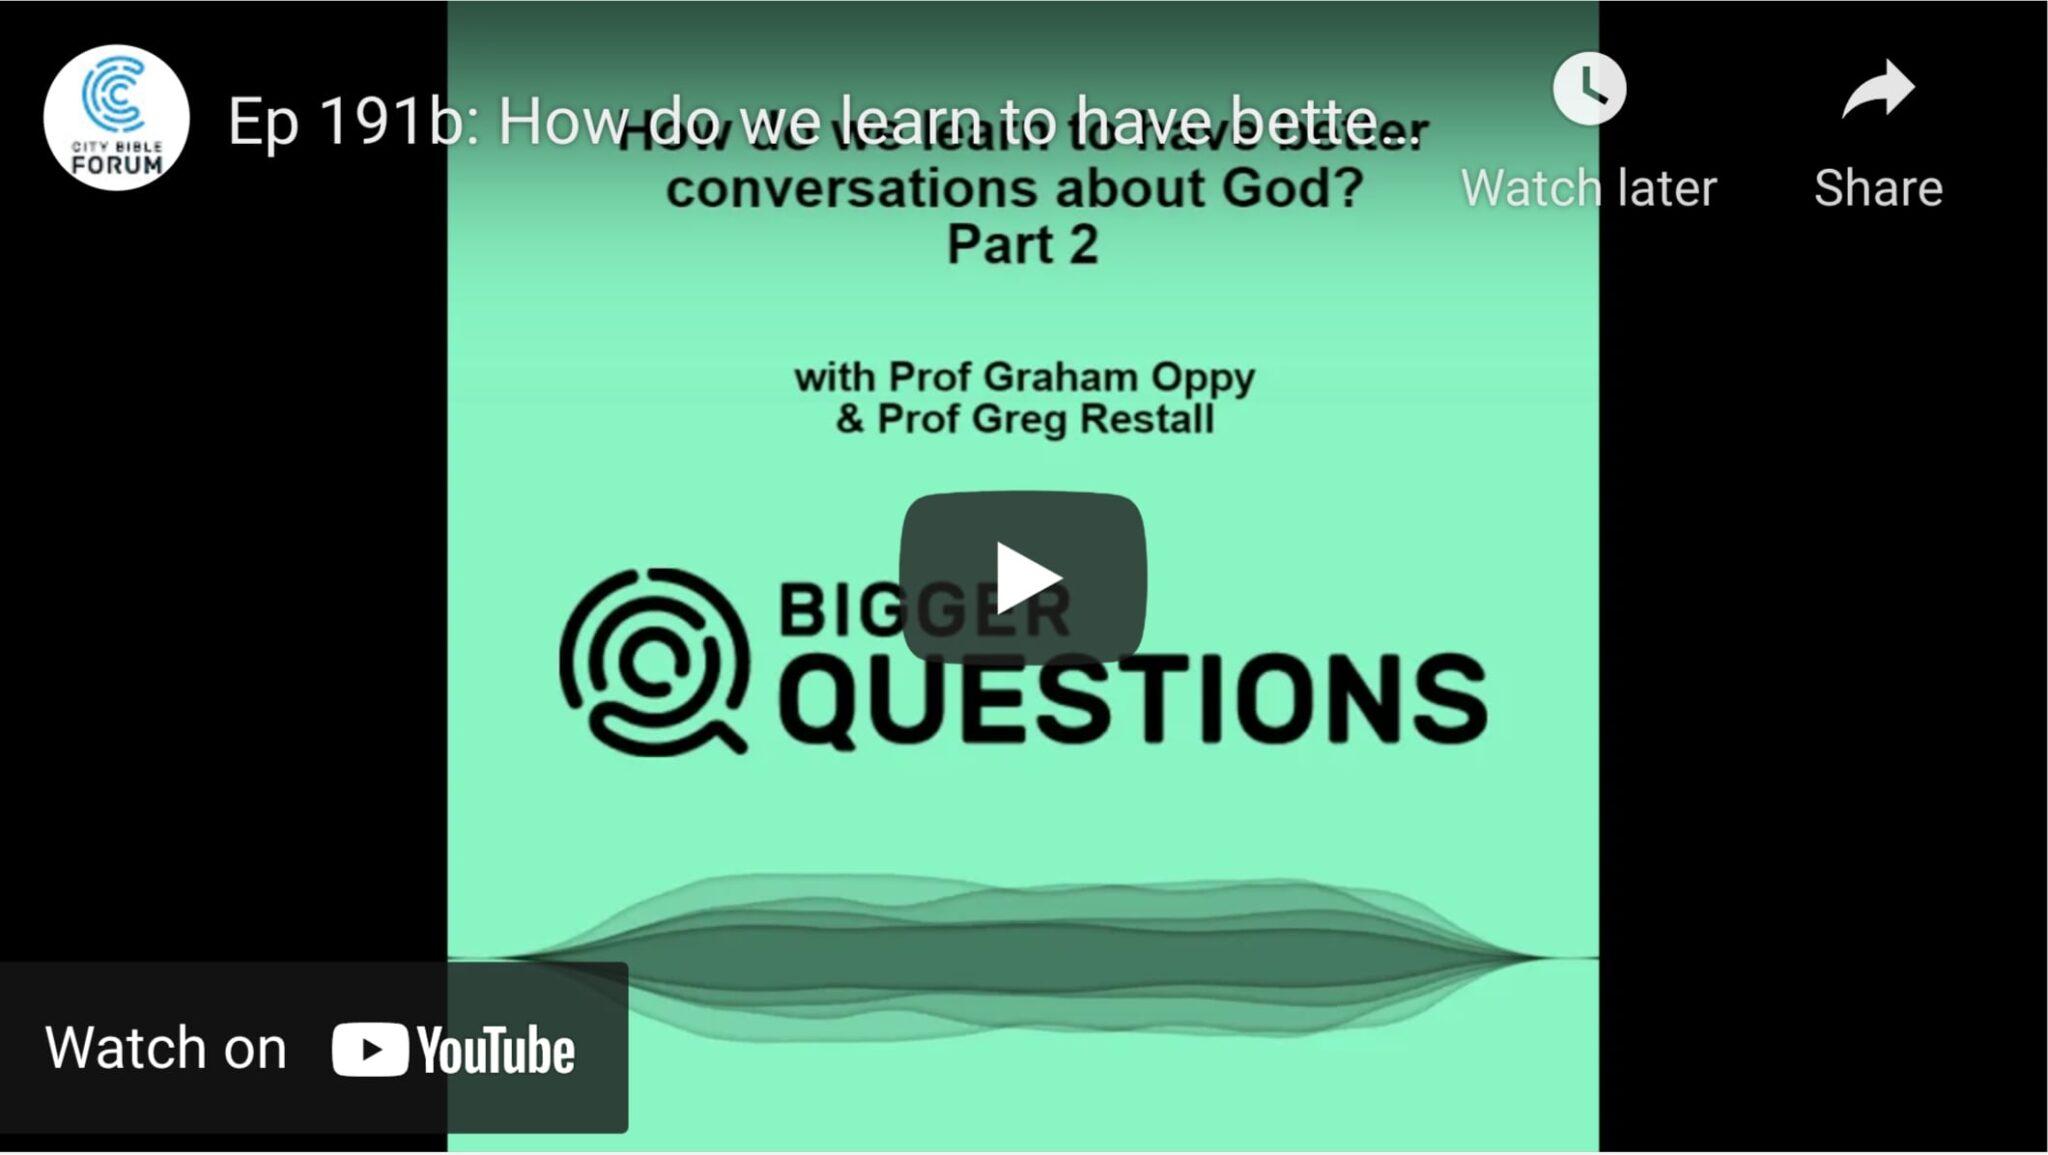 Part 2 - how do we have better conversations about God? With Professor Graham Oppy and Professor Greg Restall 